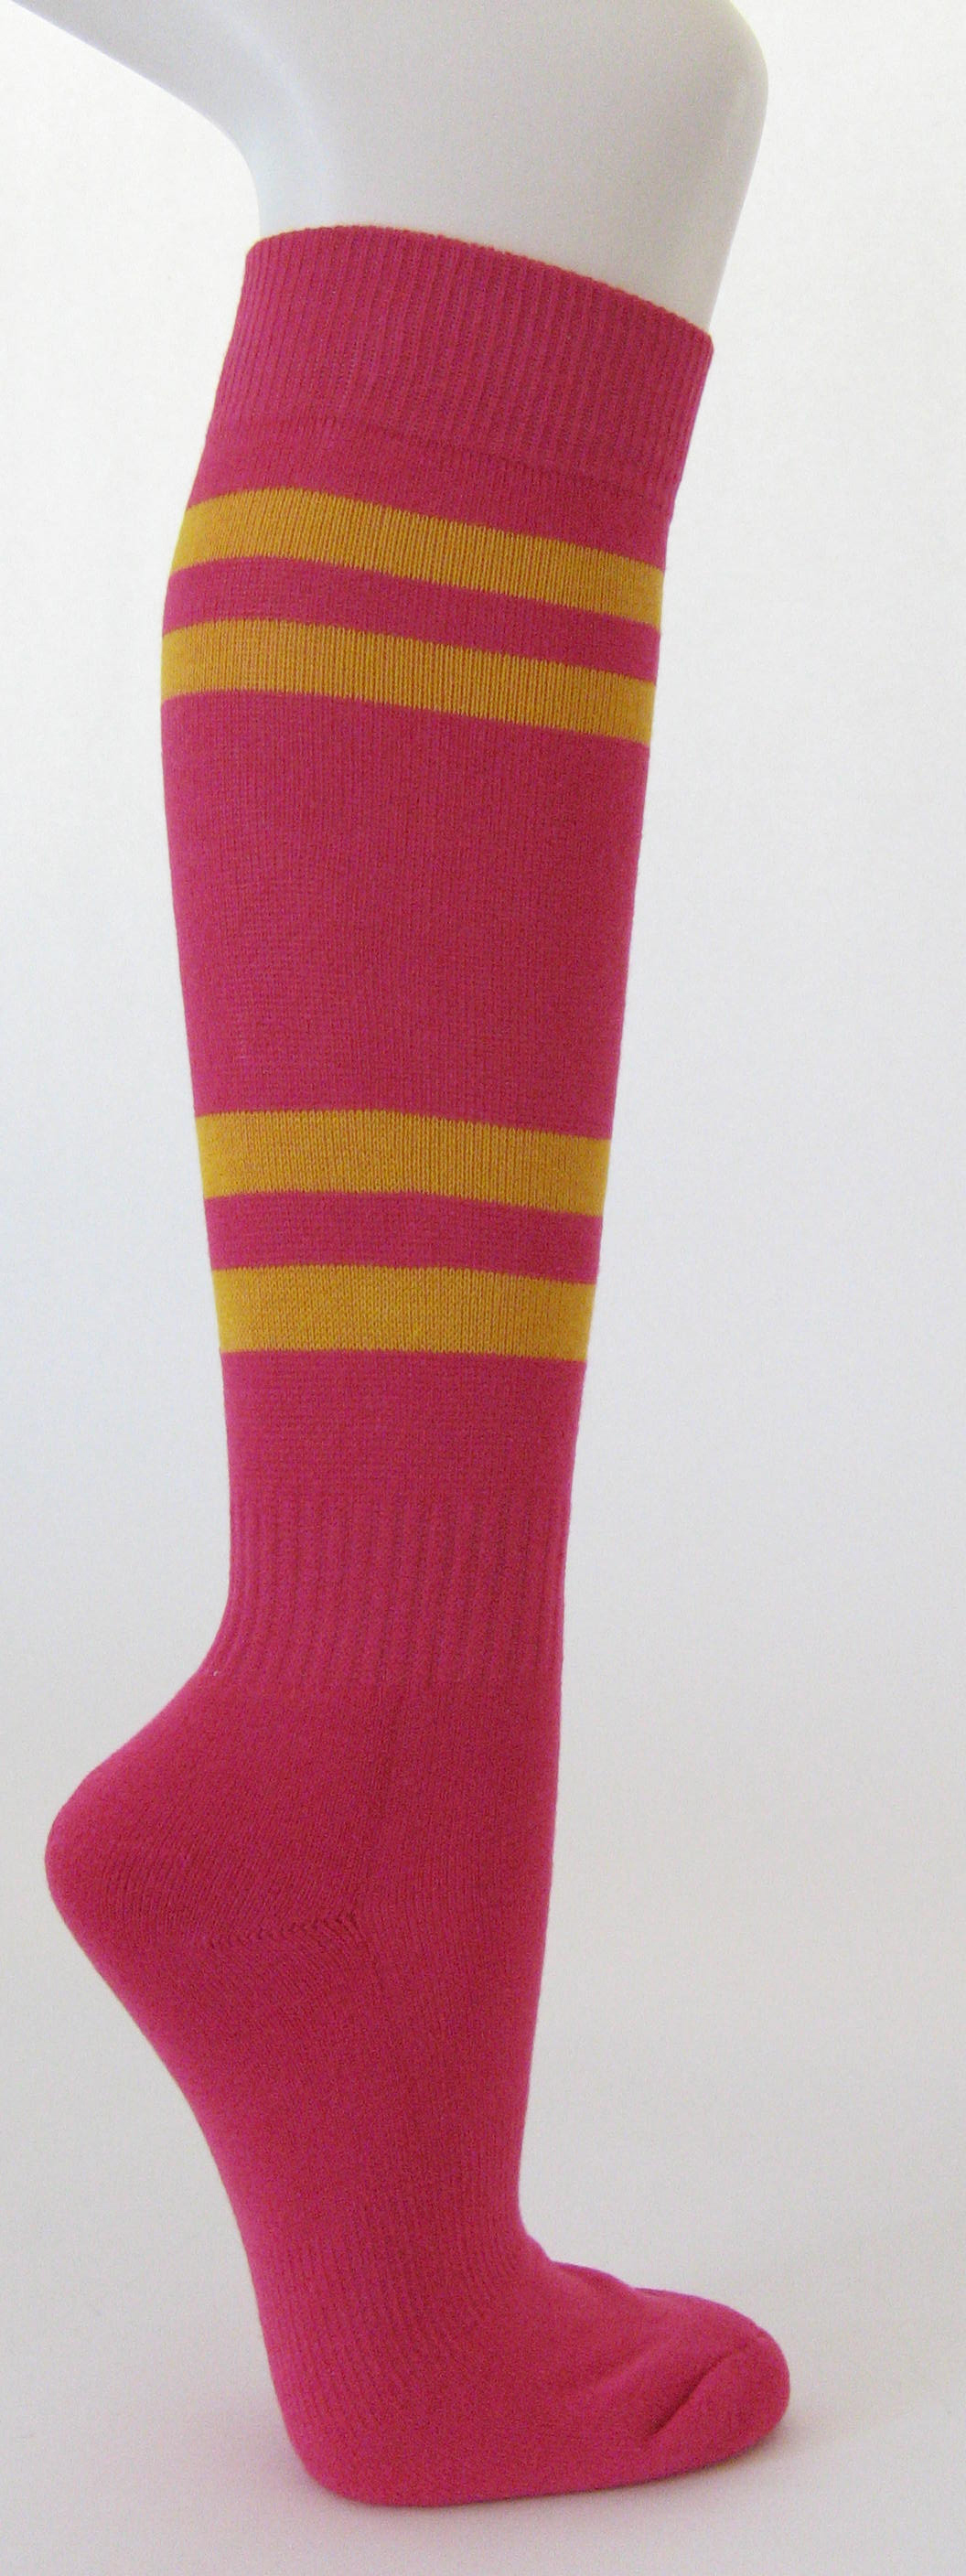 Hot pink cotton knee socks with golden yellow tripes